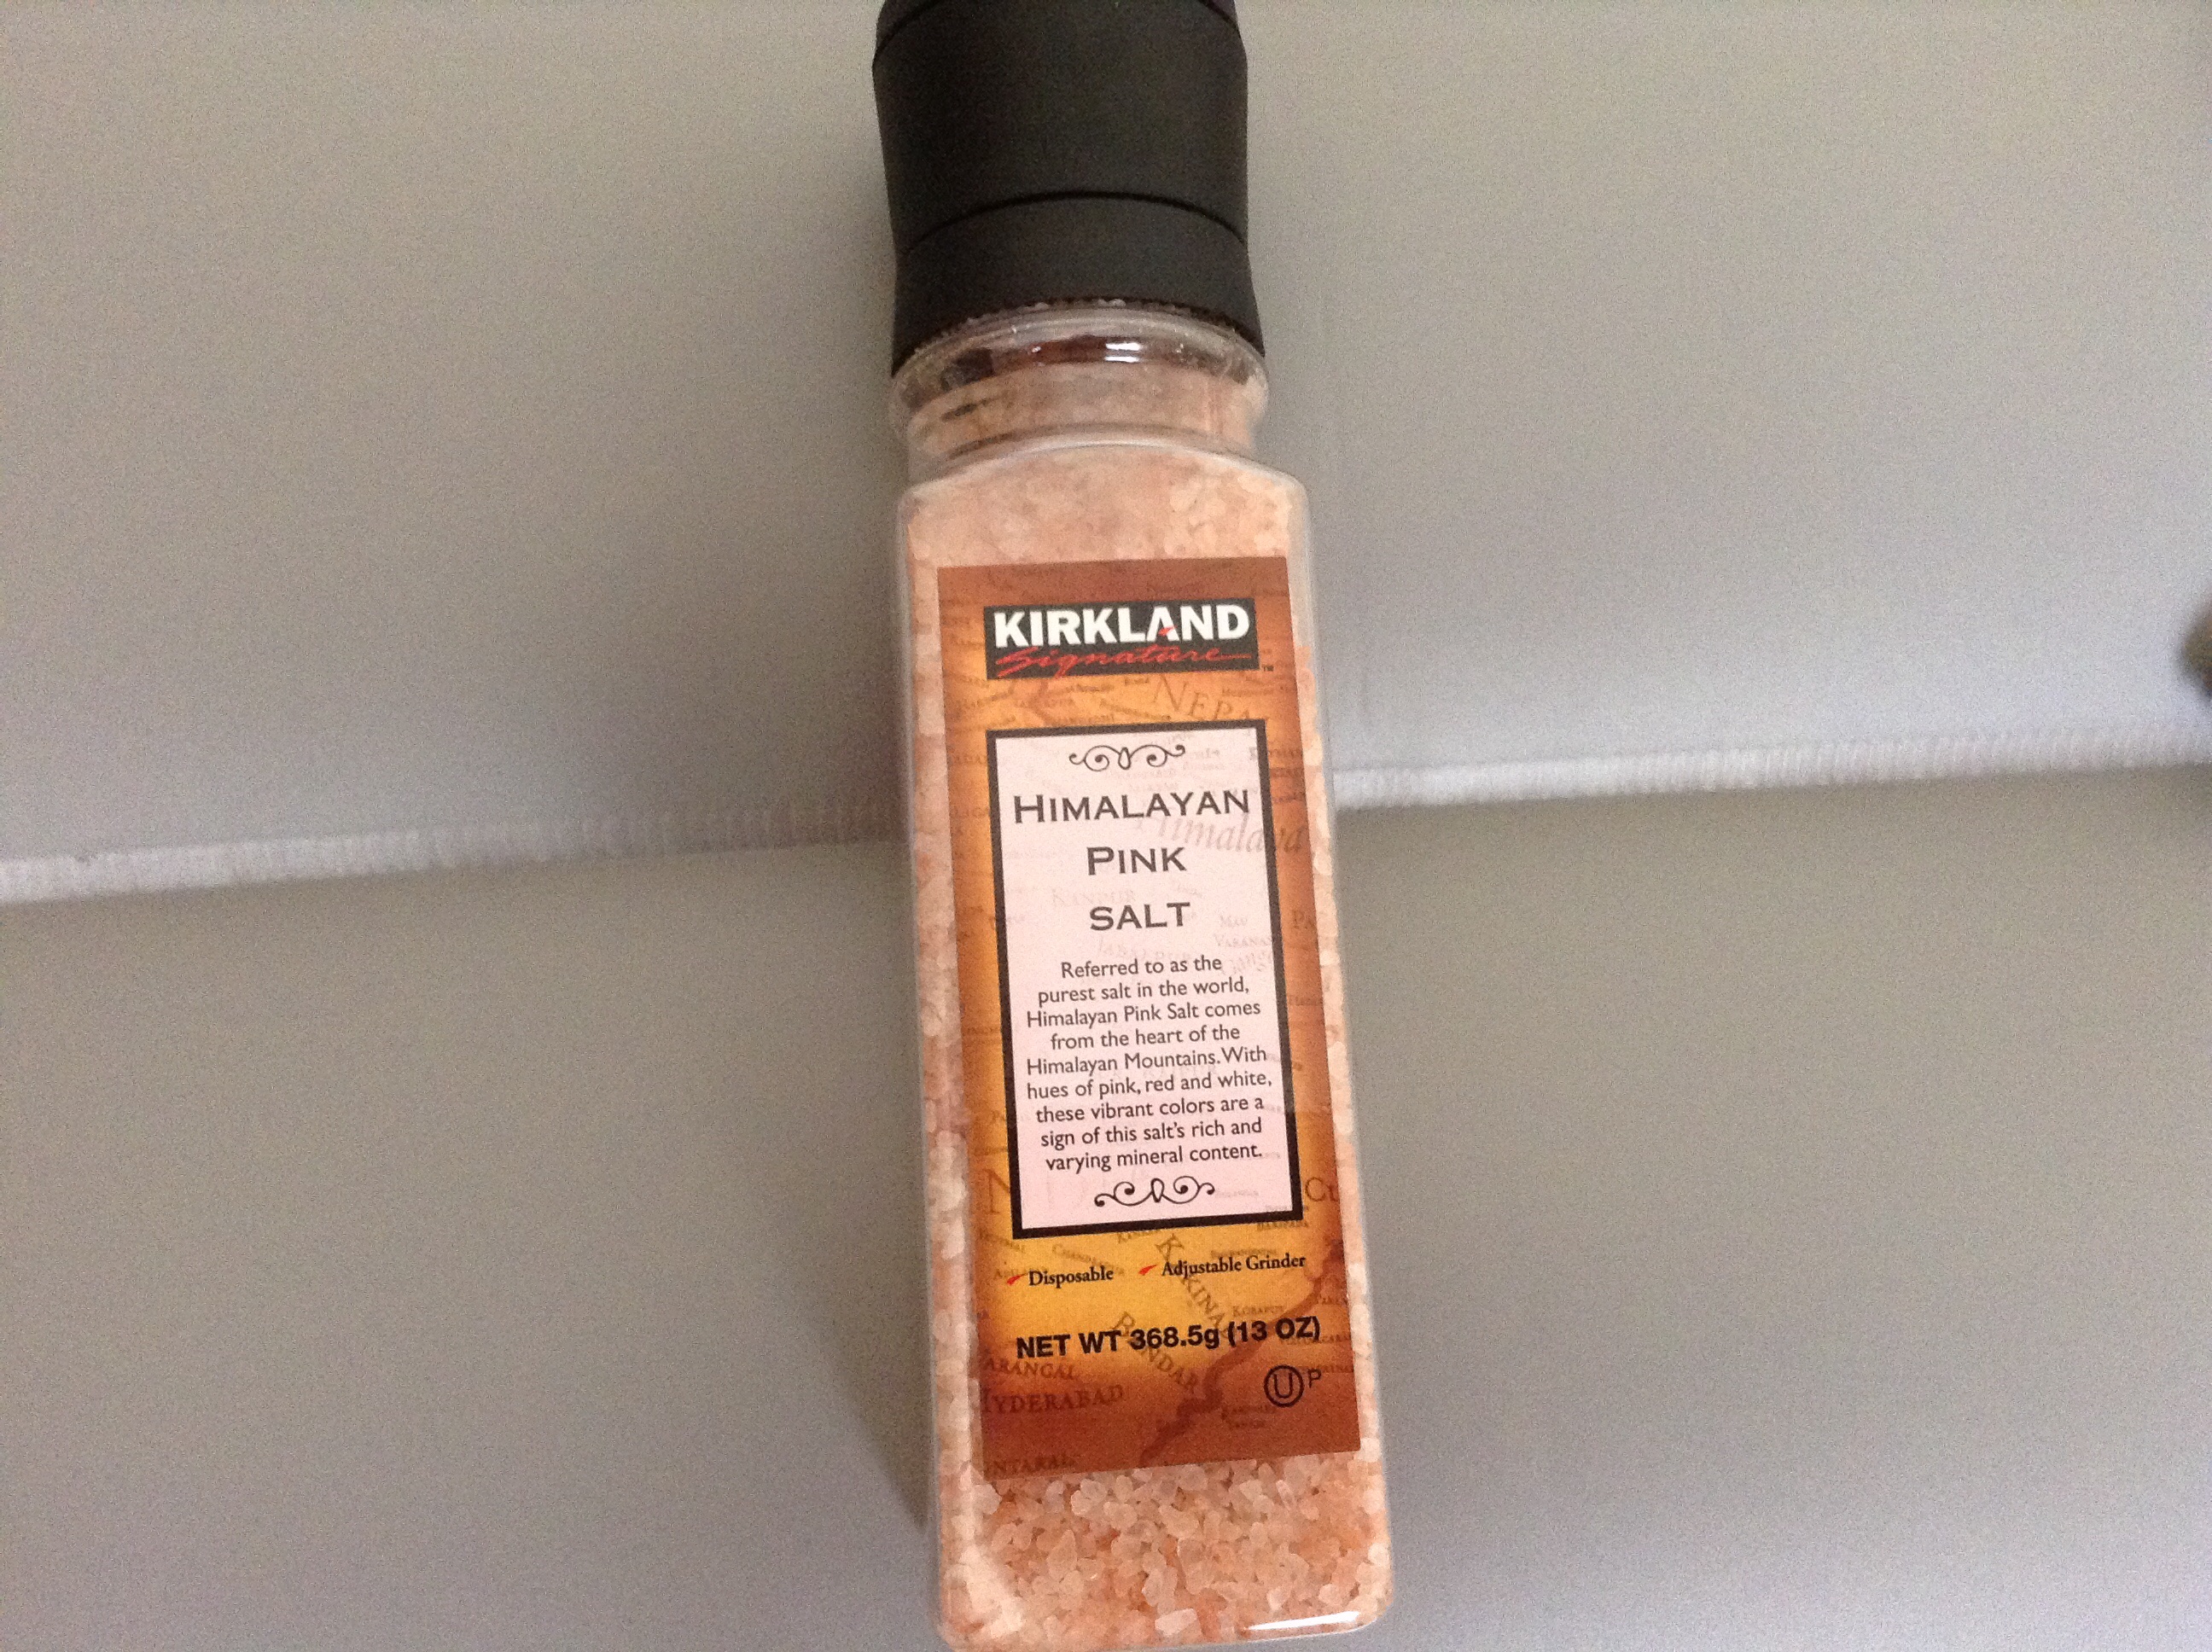 This is the Himalayan salt which I finally bought after 3 attempts. It's so expensive I always changed my mind when I was about to pay and decided not to buy it. But last week I told myself it's now or never. LOL